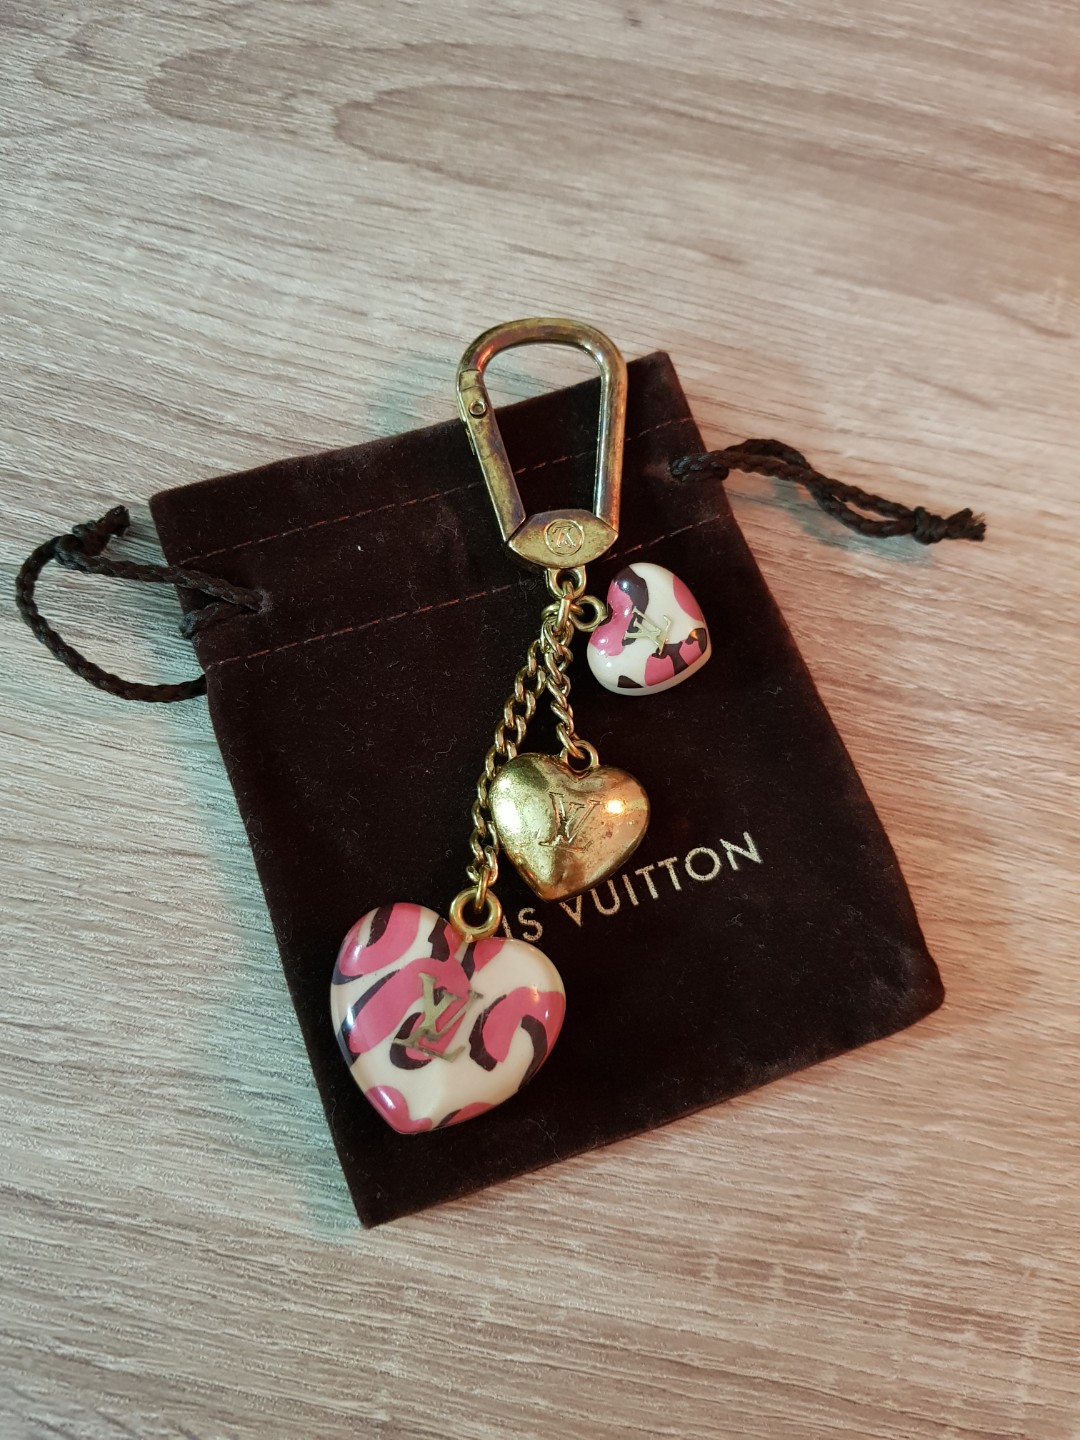 Louis Vuitton Mng Comics Bag Charm & Key Holder Multicolored Leather